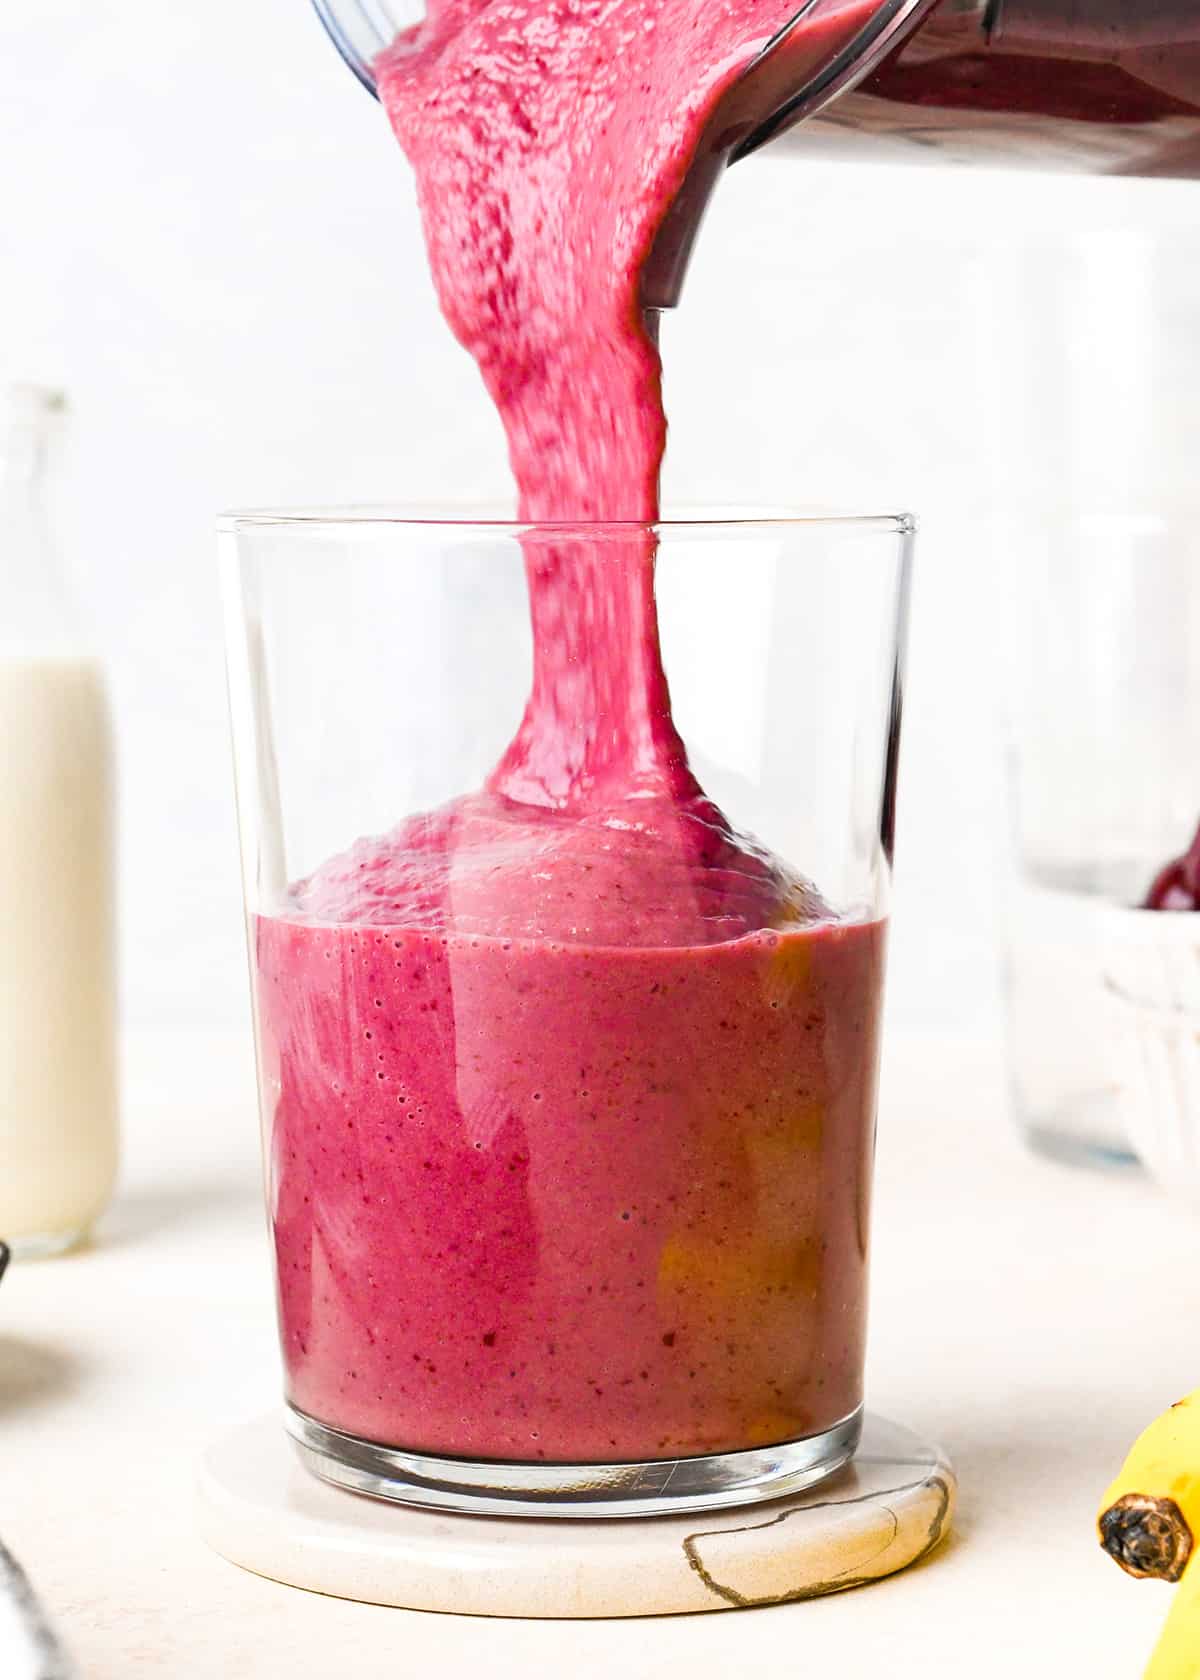 Cherry Smoothie being poured into a glass